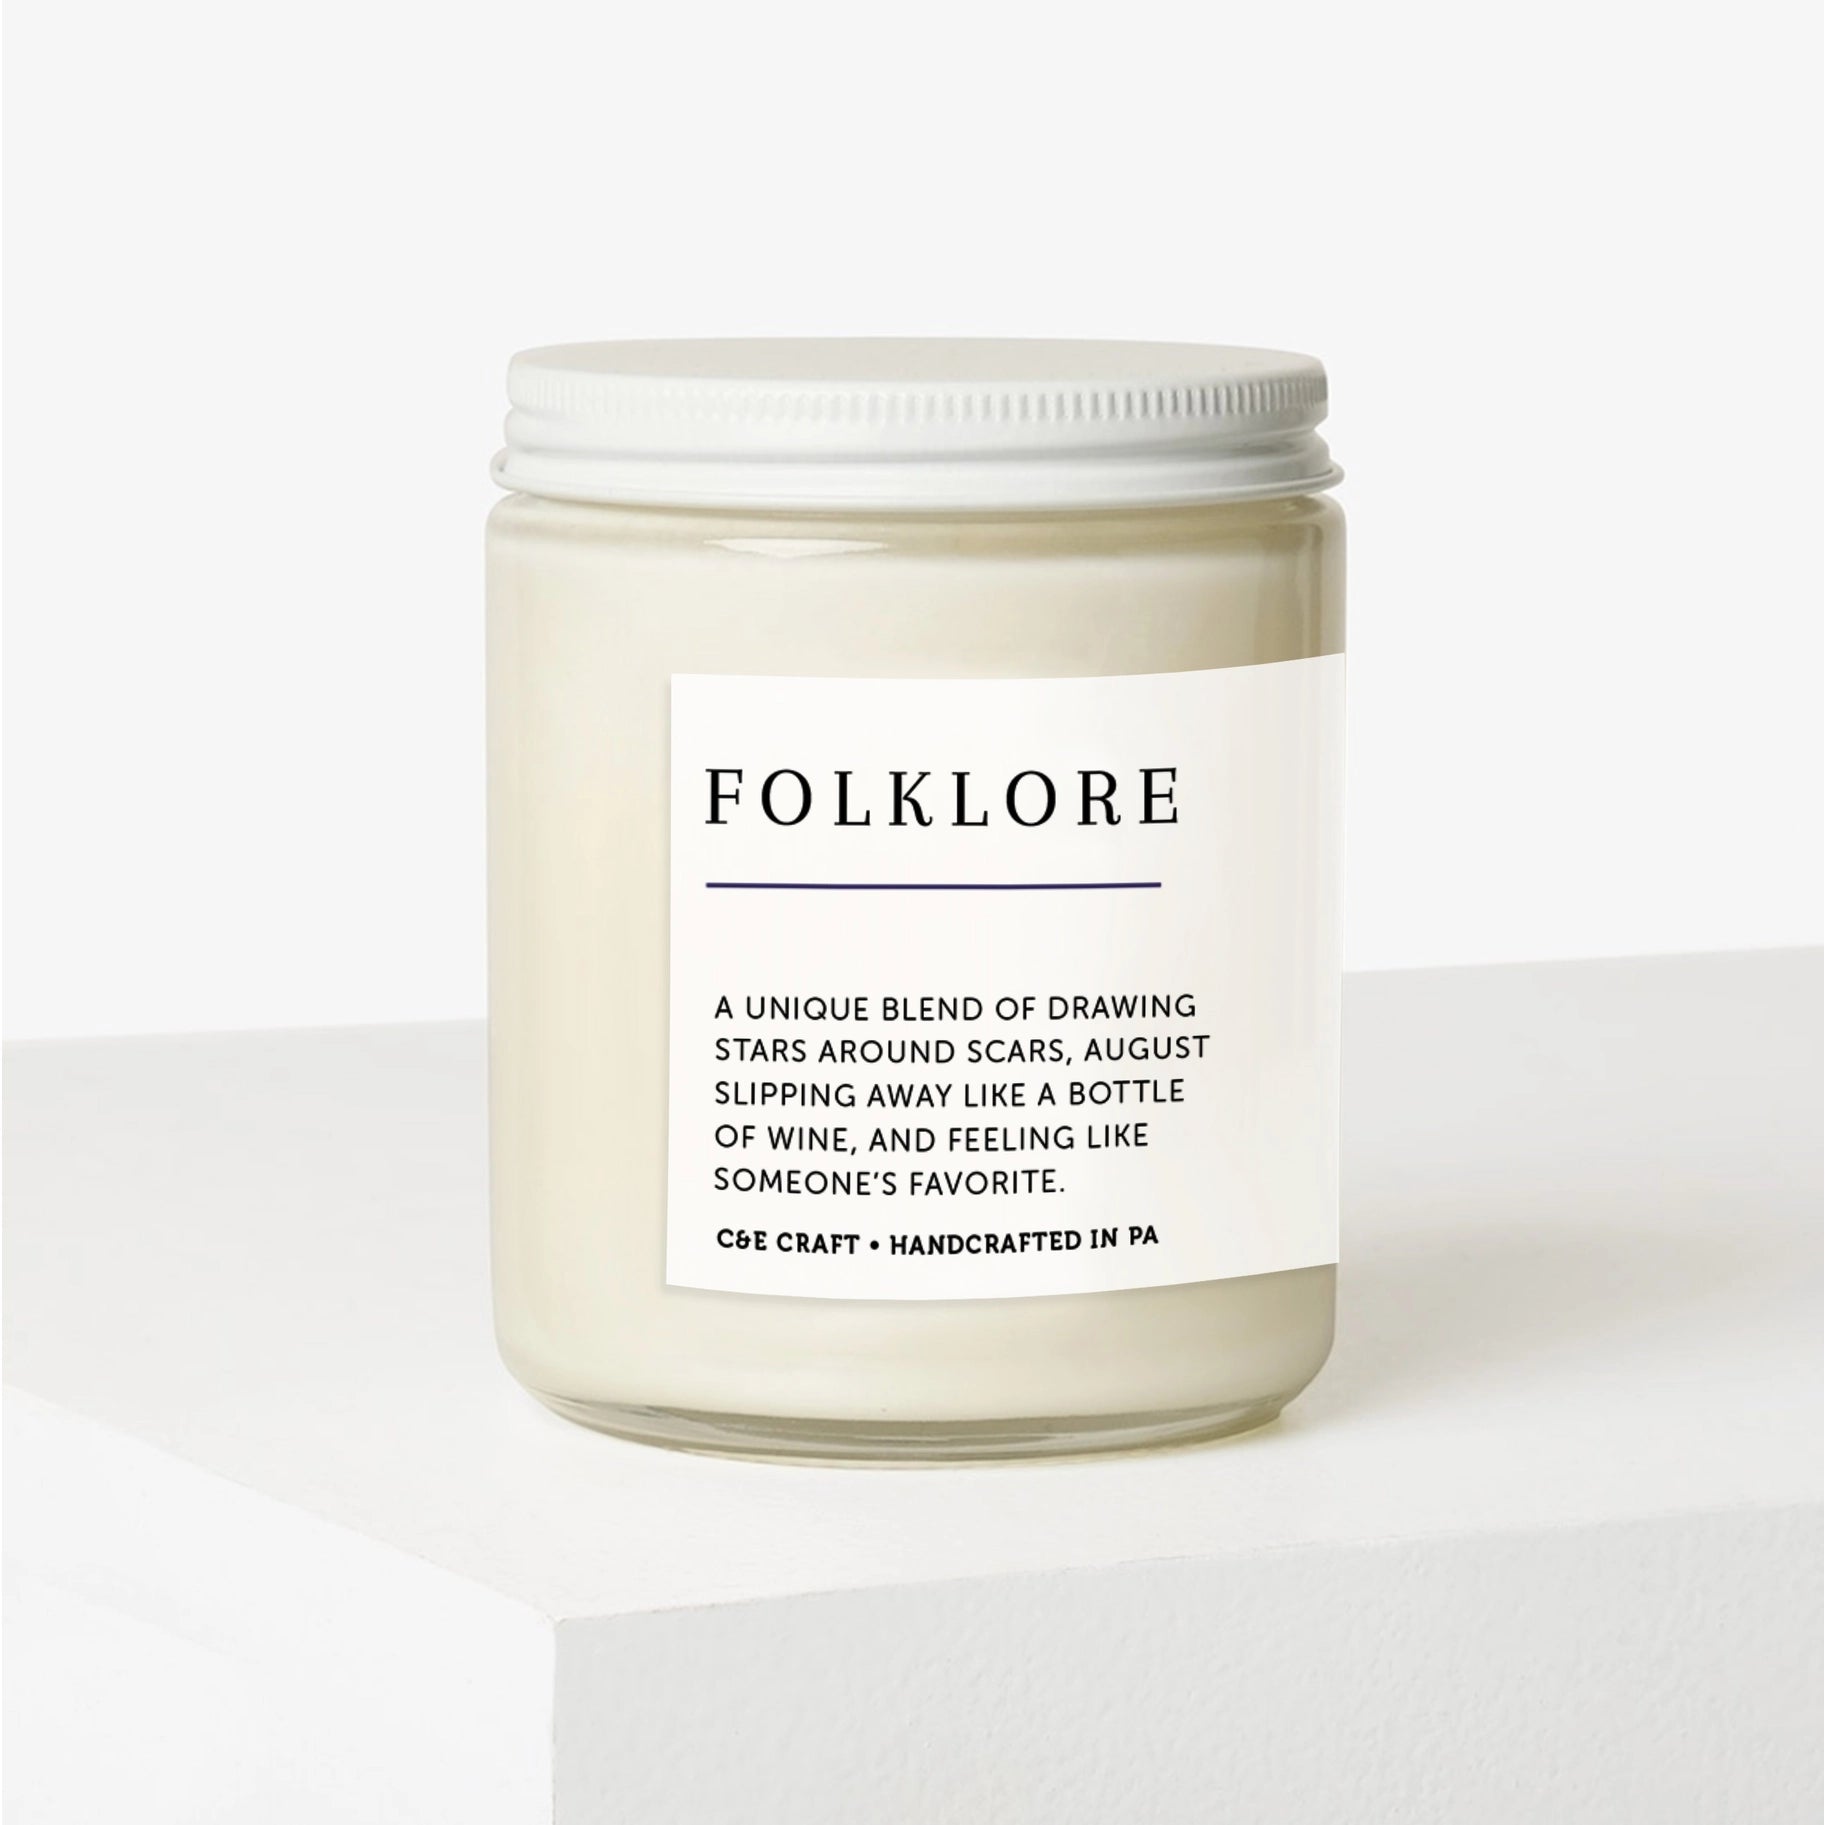 Folklore - Soy Wax Candle